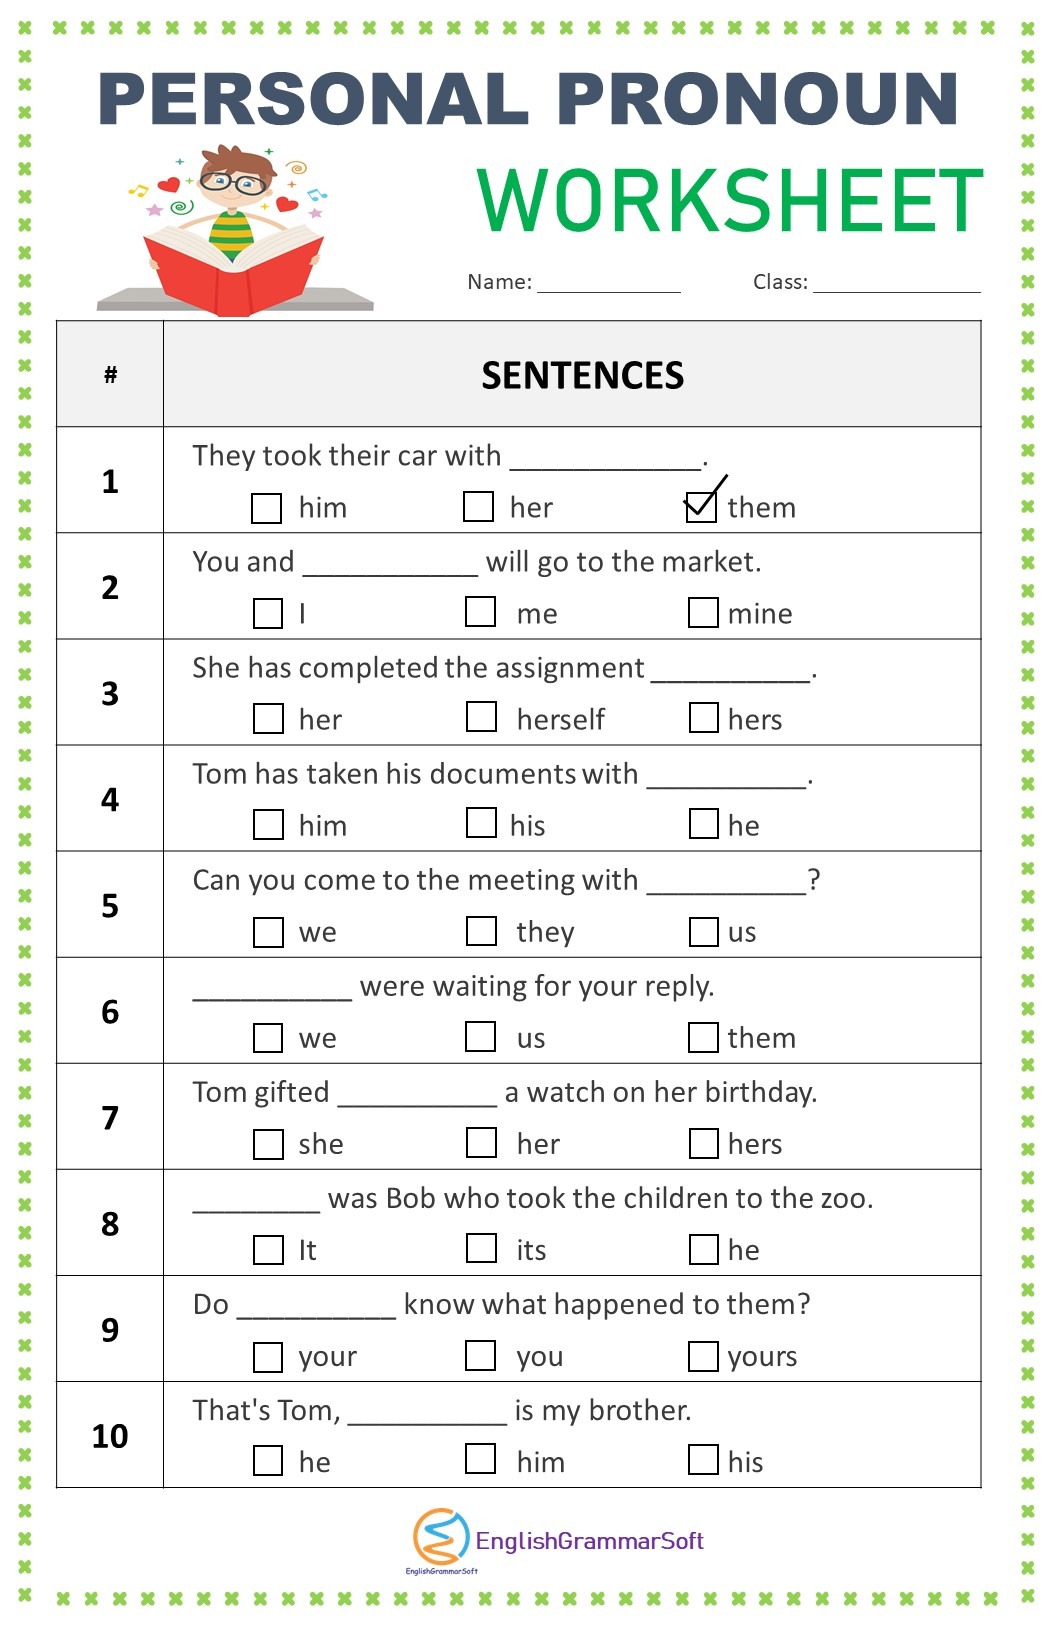 Personal Pronoun Worksheet and Exercise